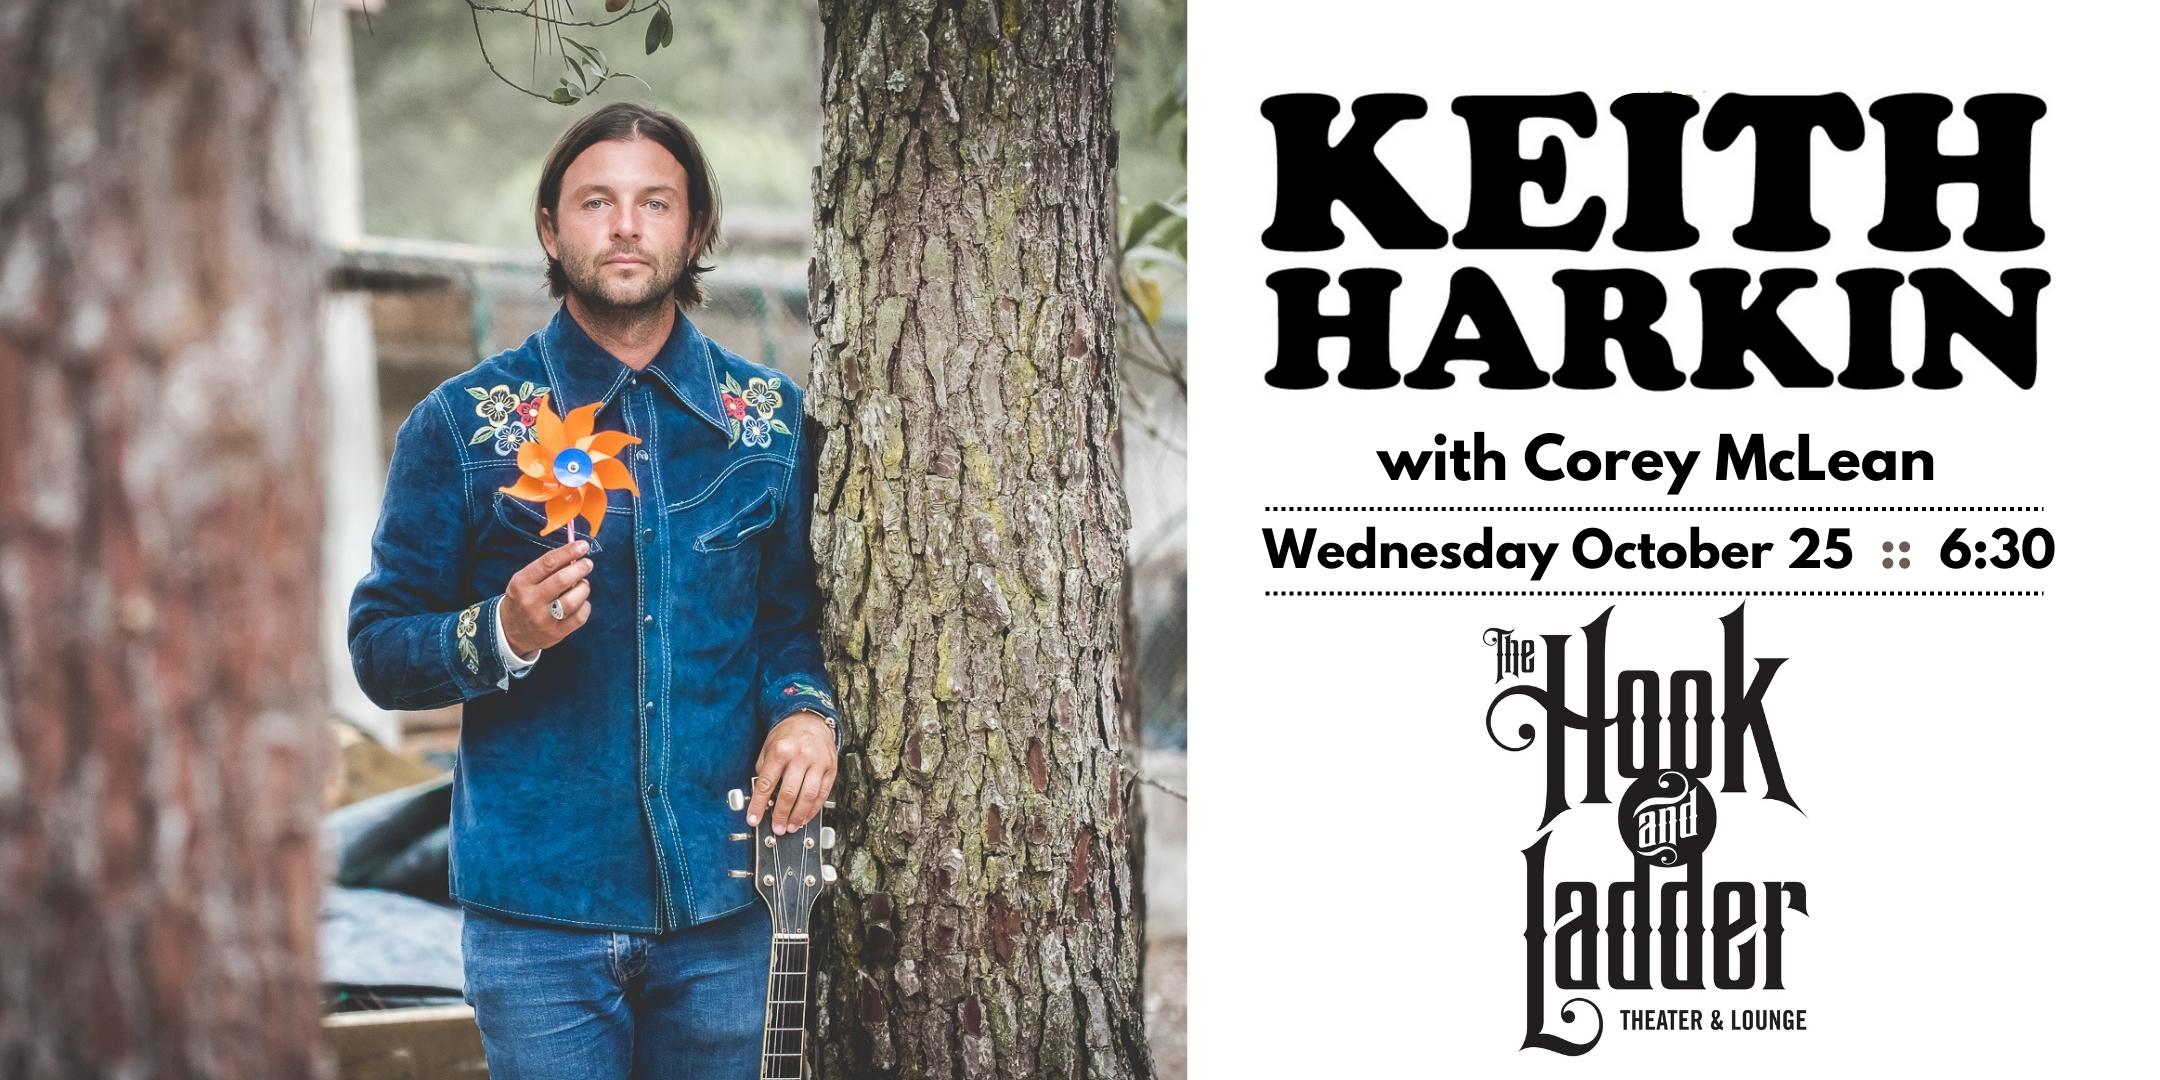 Keith Harkin w/ special guest Corey McLean Wednesday October 25 The Hook and Ladder Theater Doors 6:30pm :: Music 7:30pm :: 21+ GA Seat*: $40 / $50 Meet and Great (Includes GA Seat): $60 Meet and Great with Sound Check (Includes GA Seat): $80 *Seats available on a first-come, first-served basis Does not include fees NO REFUNDS